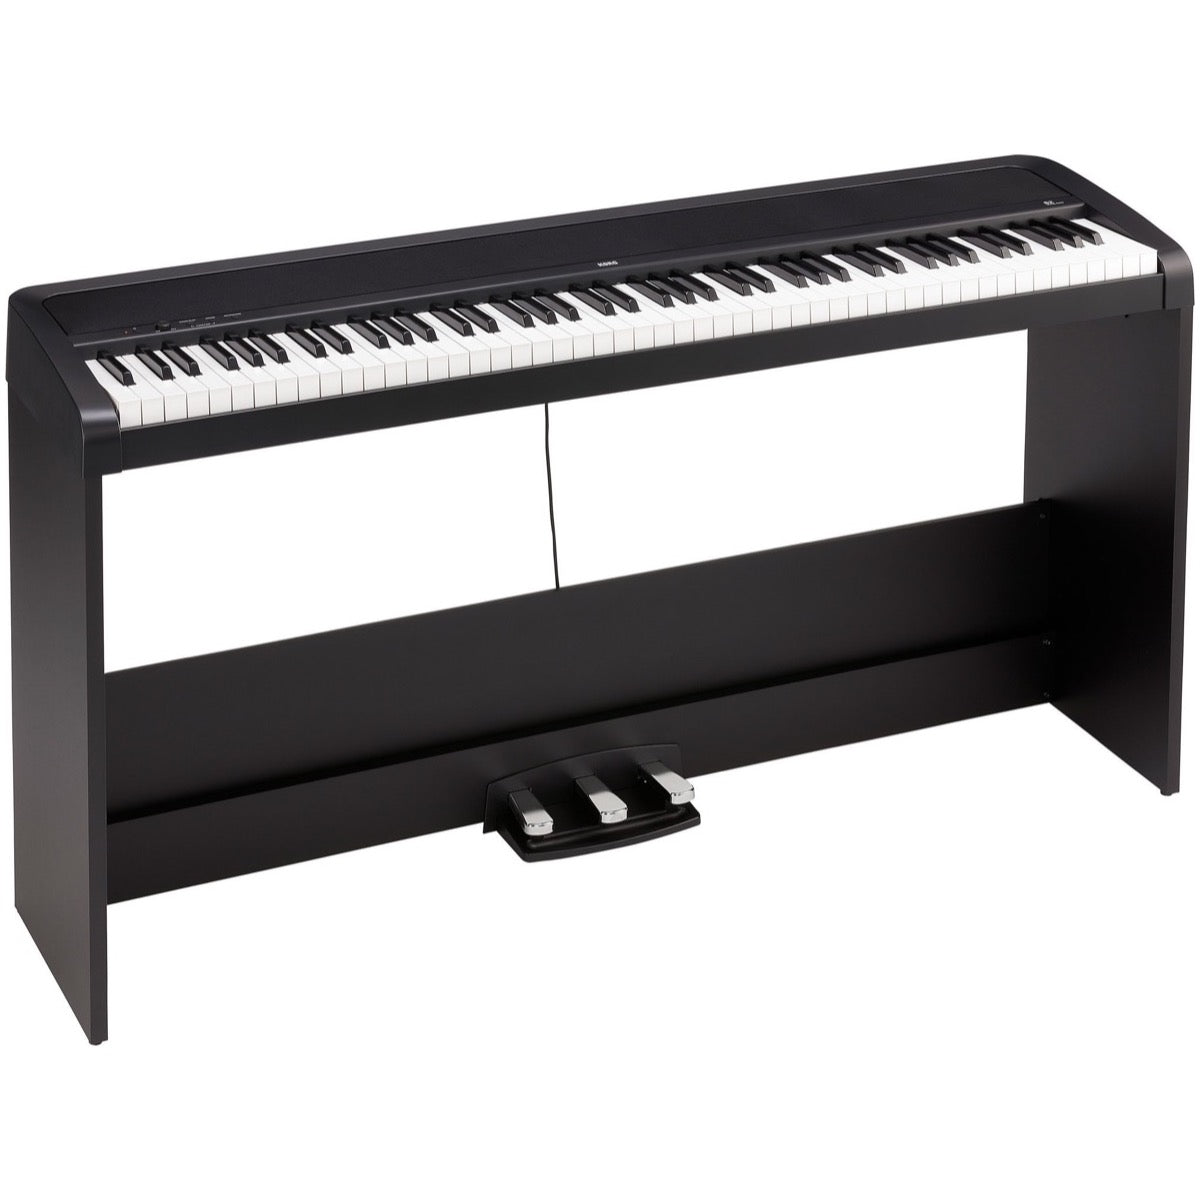 Korg B2 Digital Piano, 88-Key, Black, B2SP, with Stand and Pedal